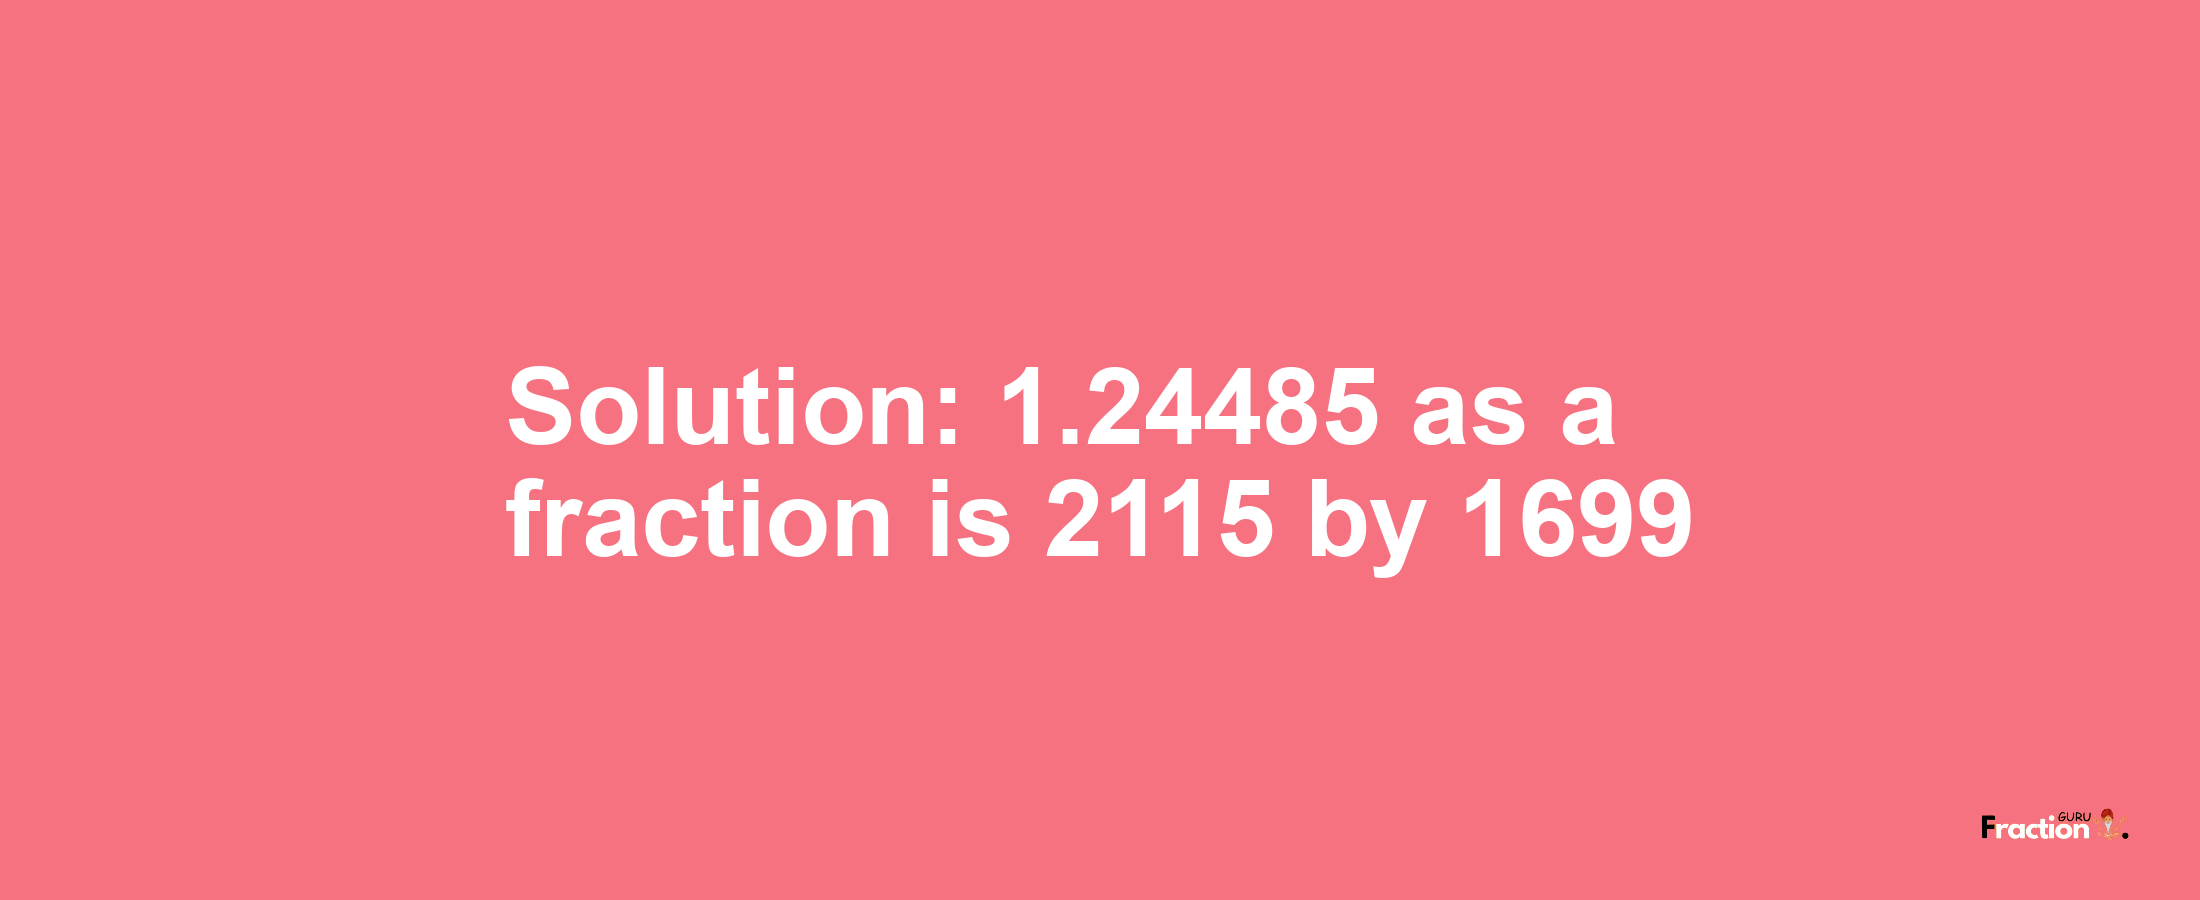 Solution:1.24485 as a fraction is 2115/1699